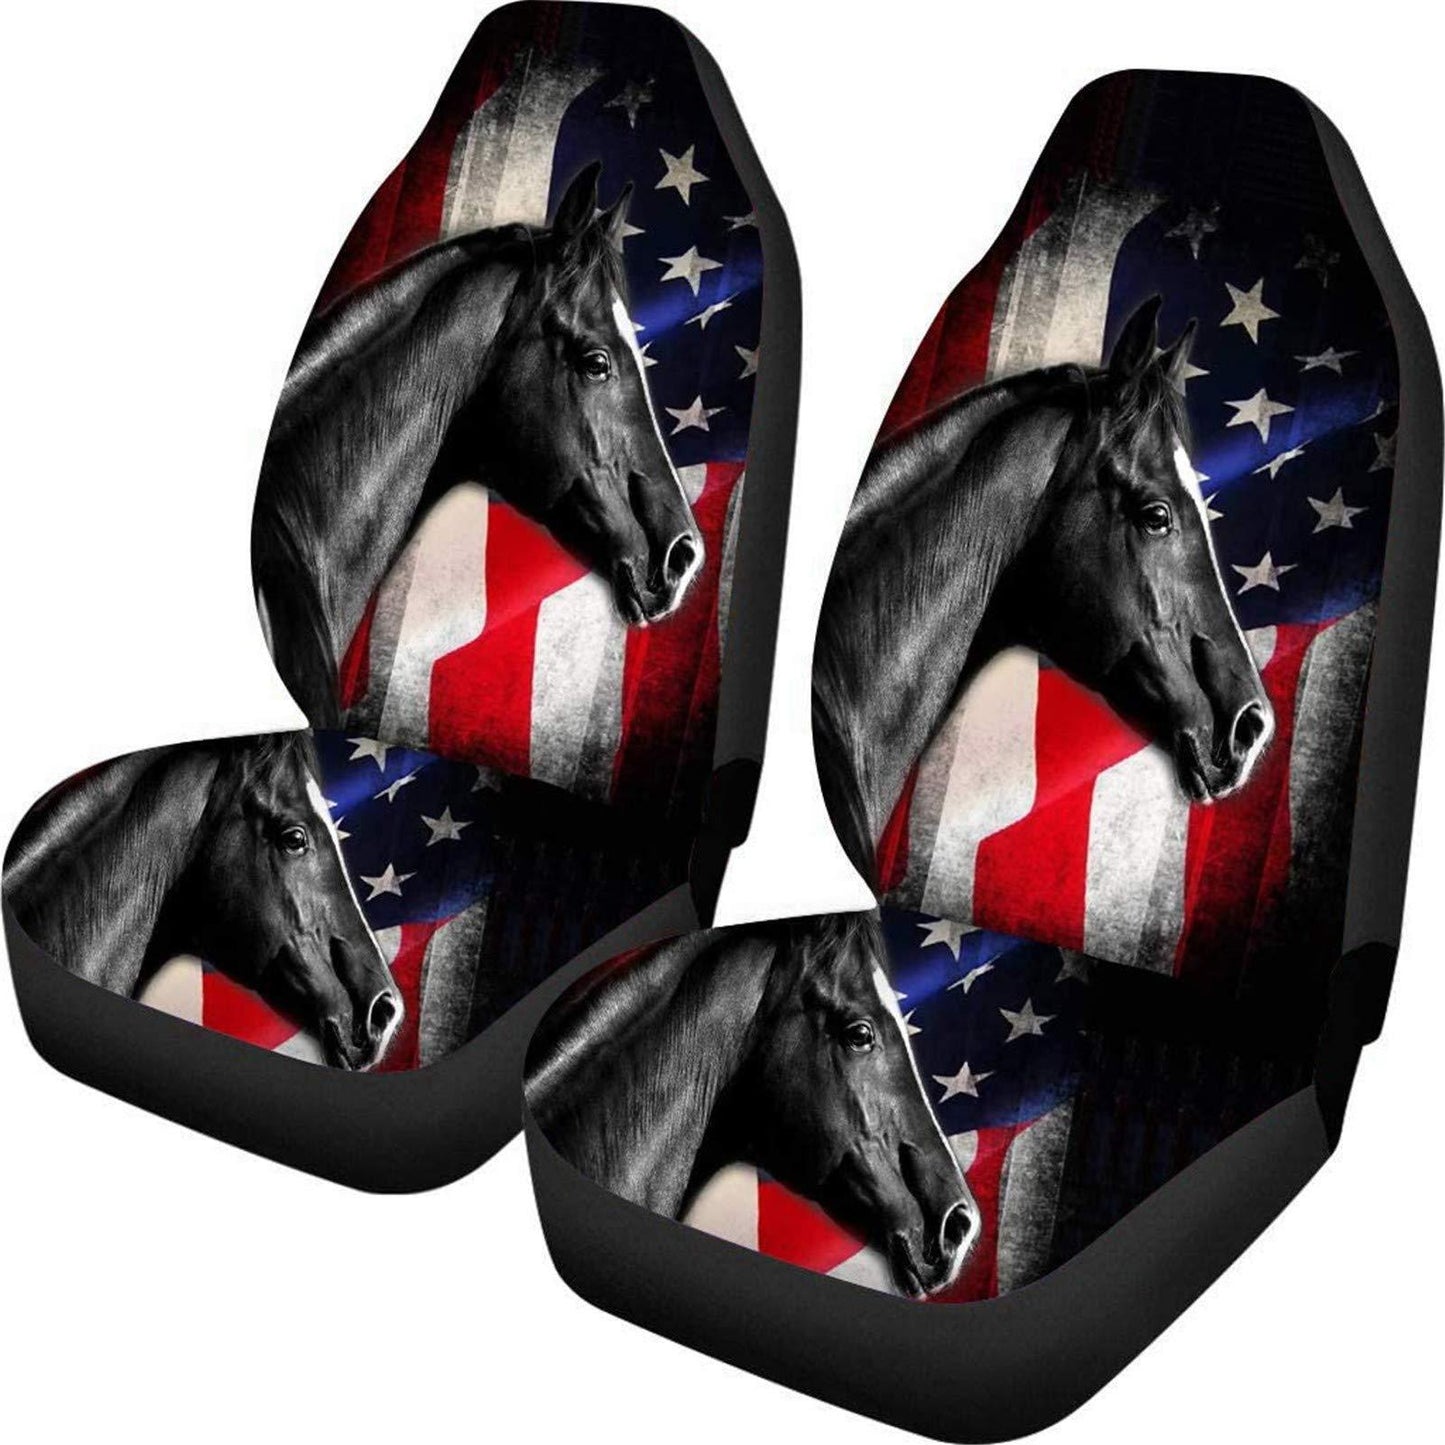 Car American Flag Decorative Front Seat Cover Cushion